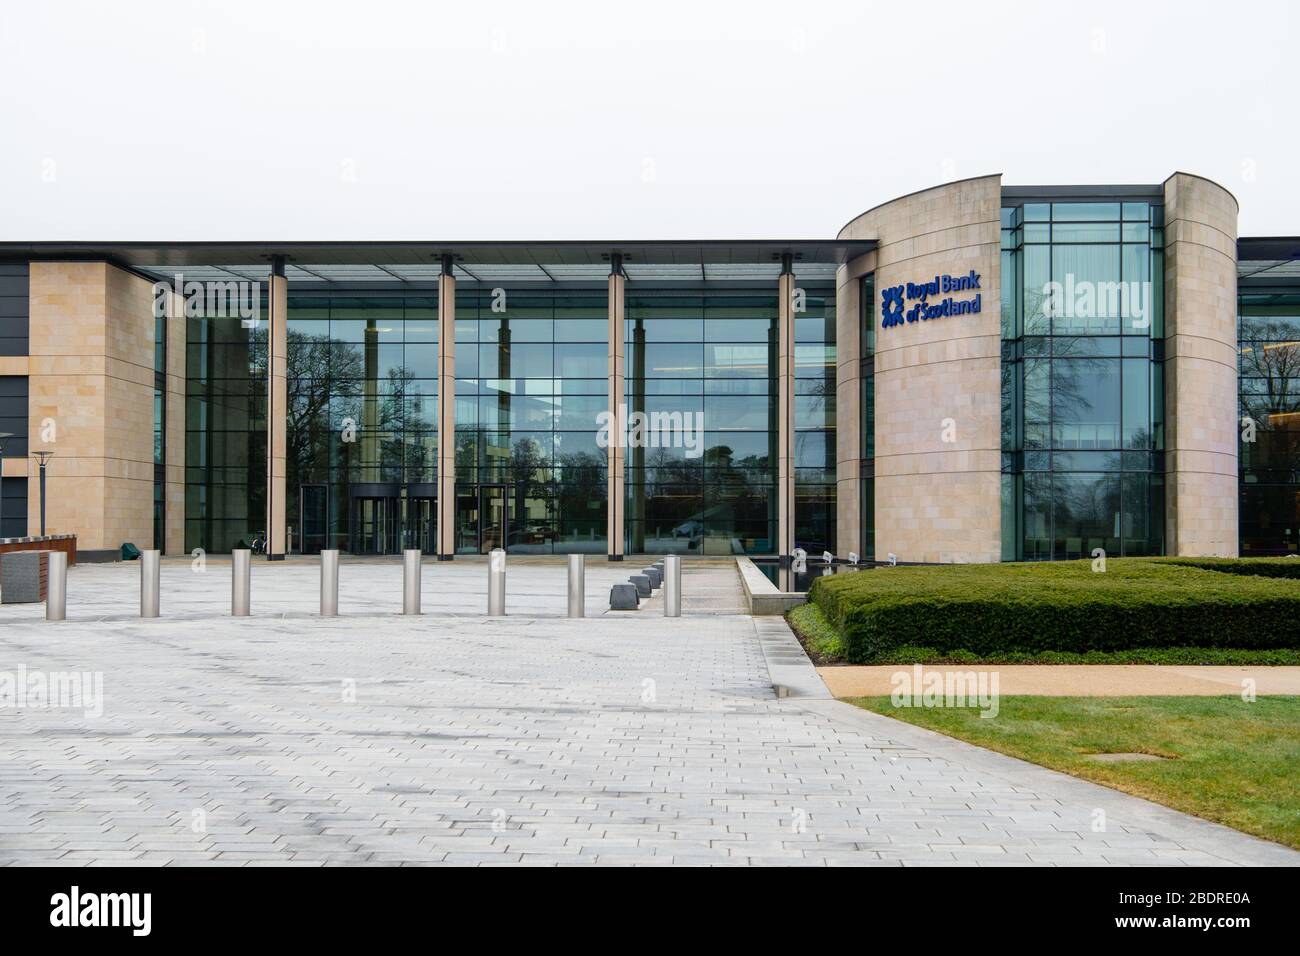 RHS HQ, Gogarburn, Royal Bank of Scotland, Headquarters, Conference centre Stock Photo